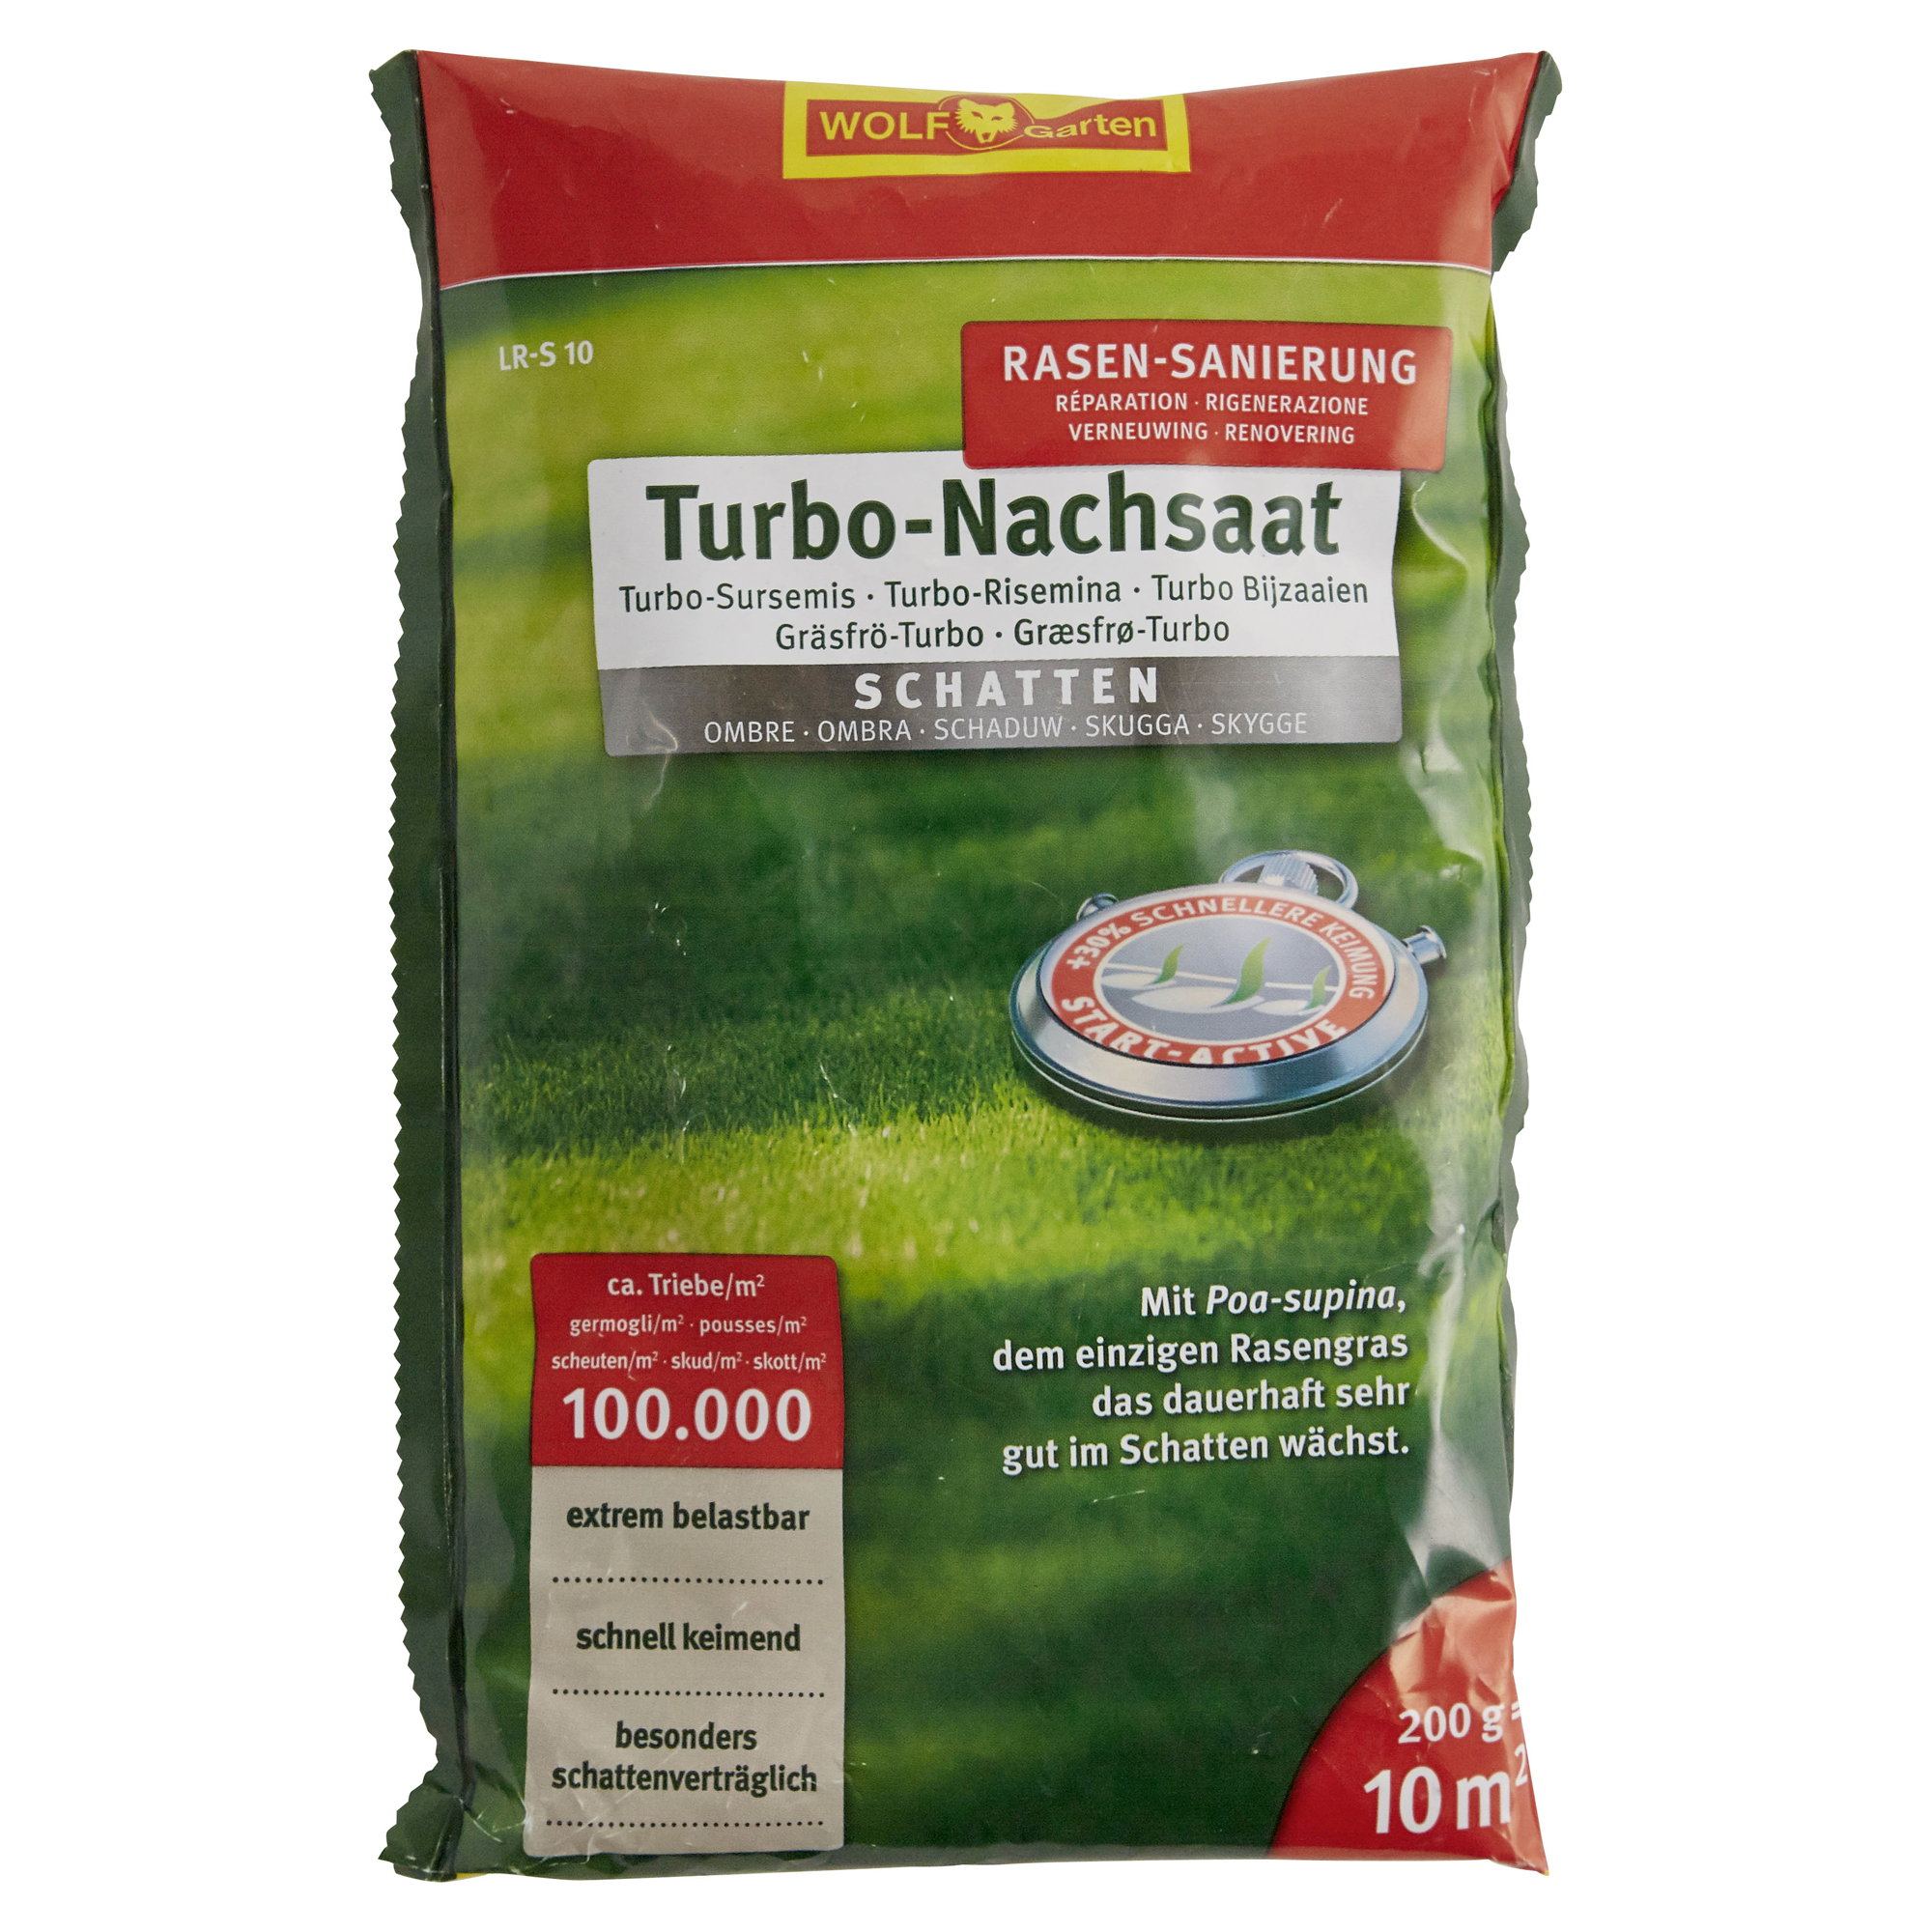 Turbo-Nachsaat Schatten 10 m² 200 g + product picture